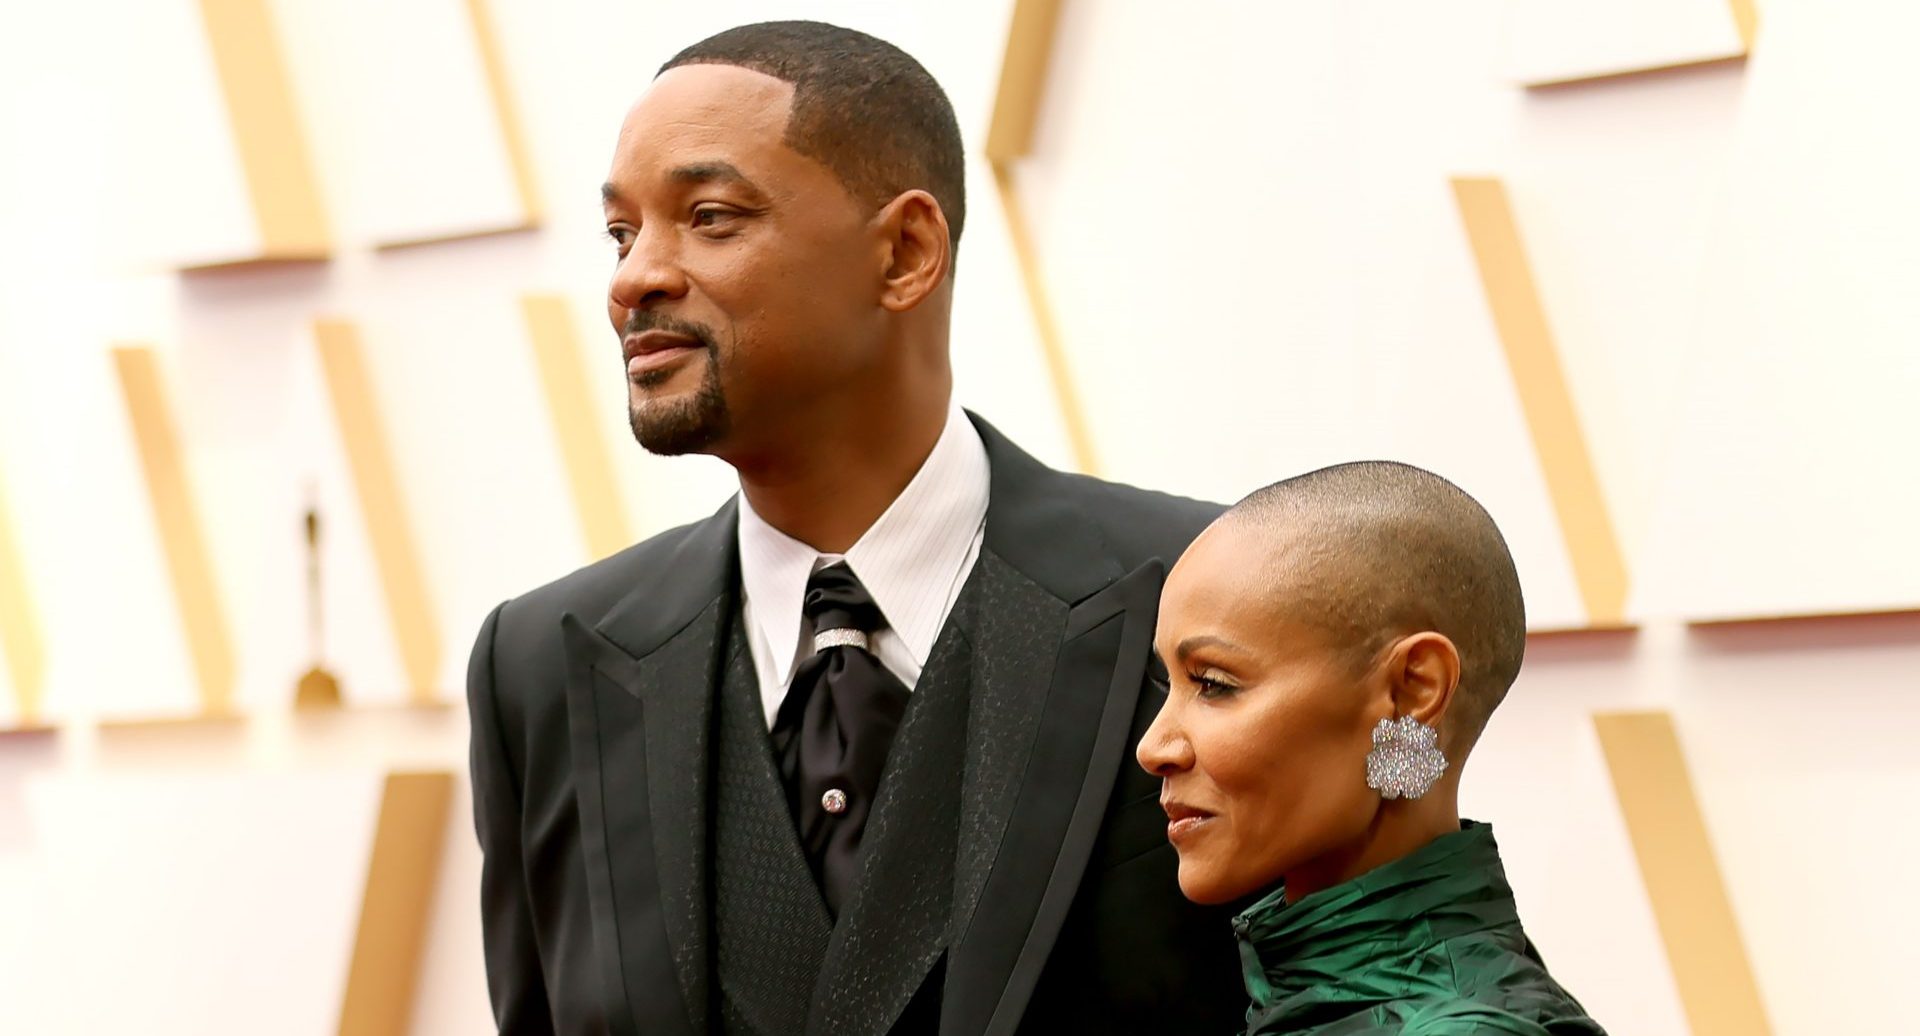 Jada Pinkett Smith Reveals Her Family's Focus On "Deep Healing" Nearly A Month After Will Smith's Oscars Slap